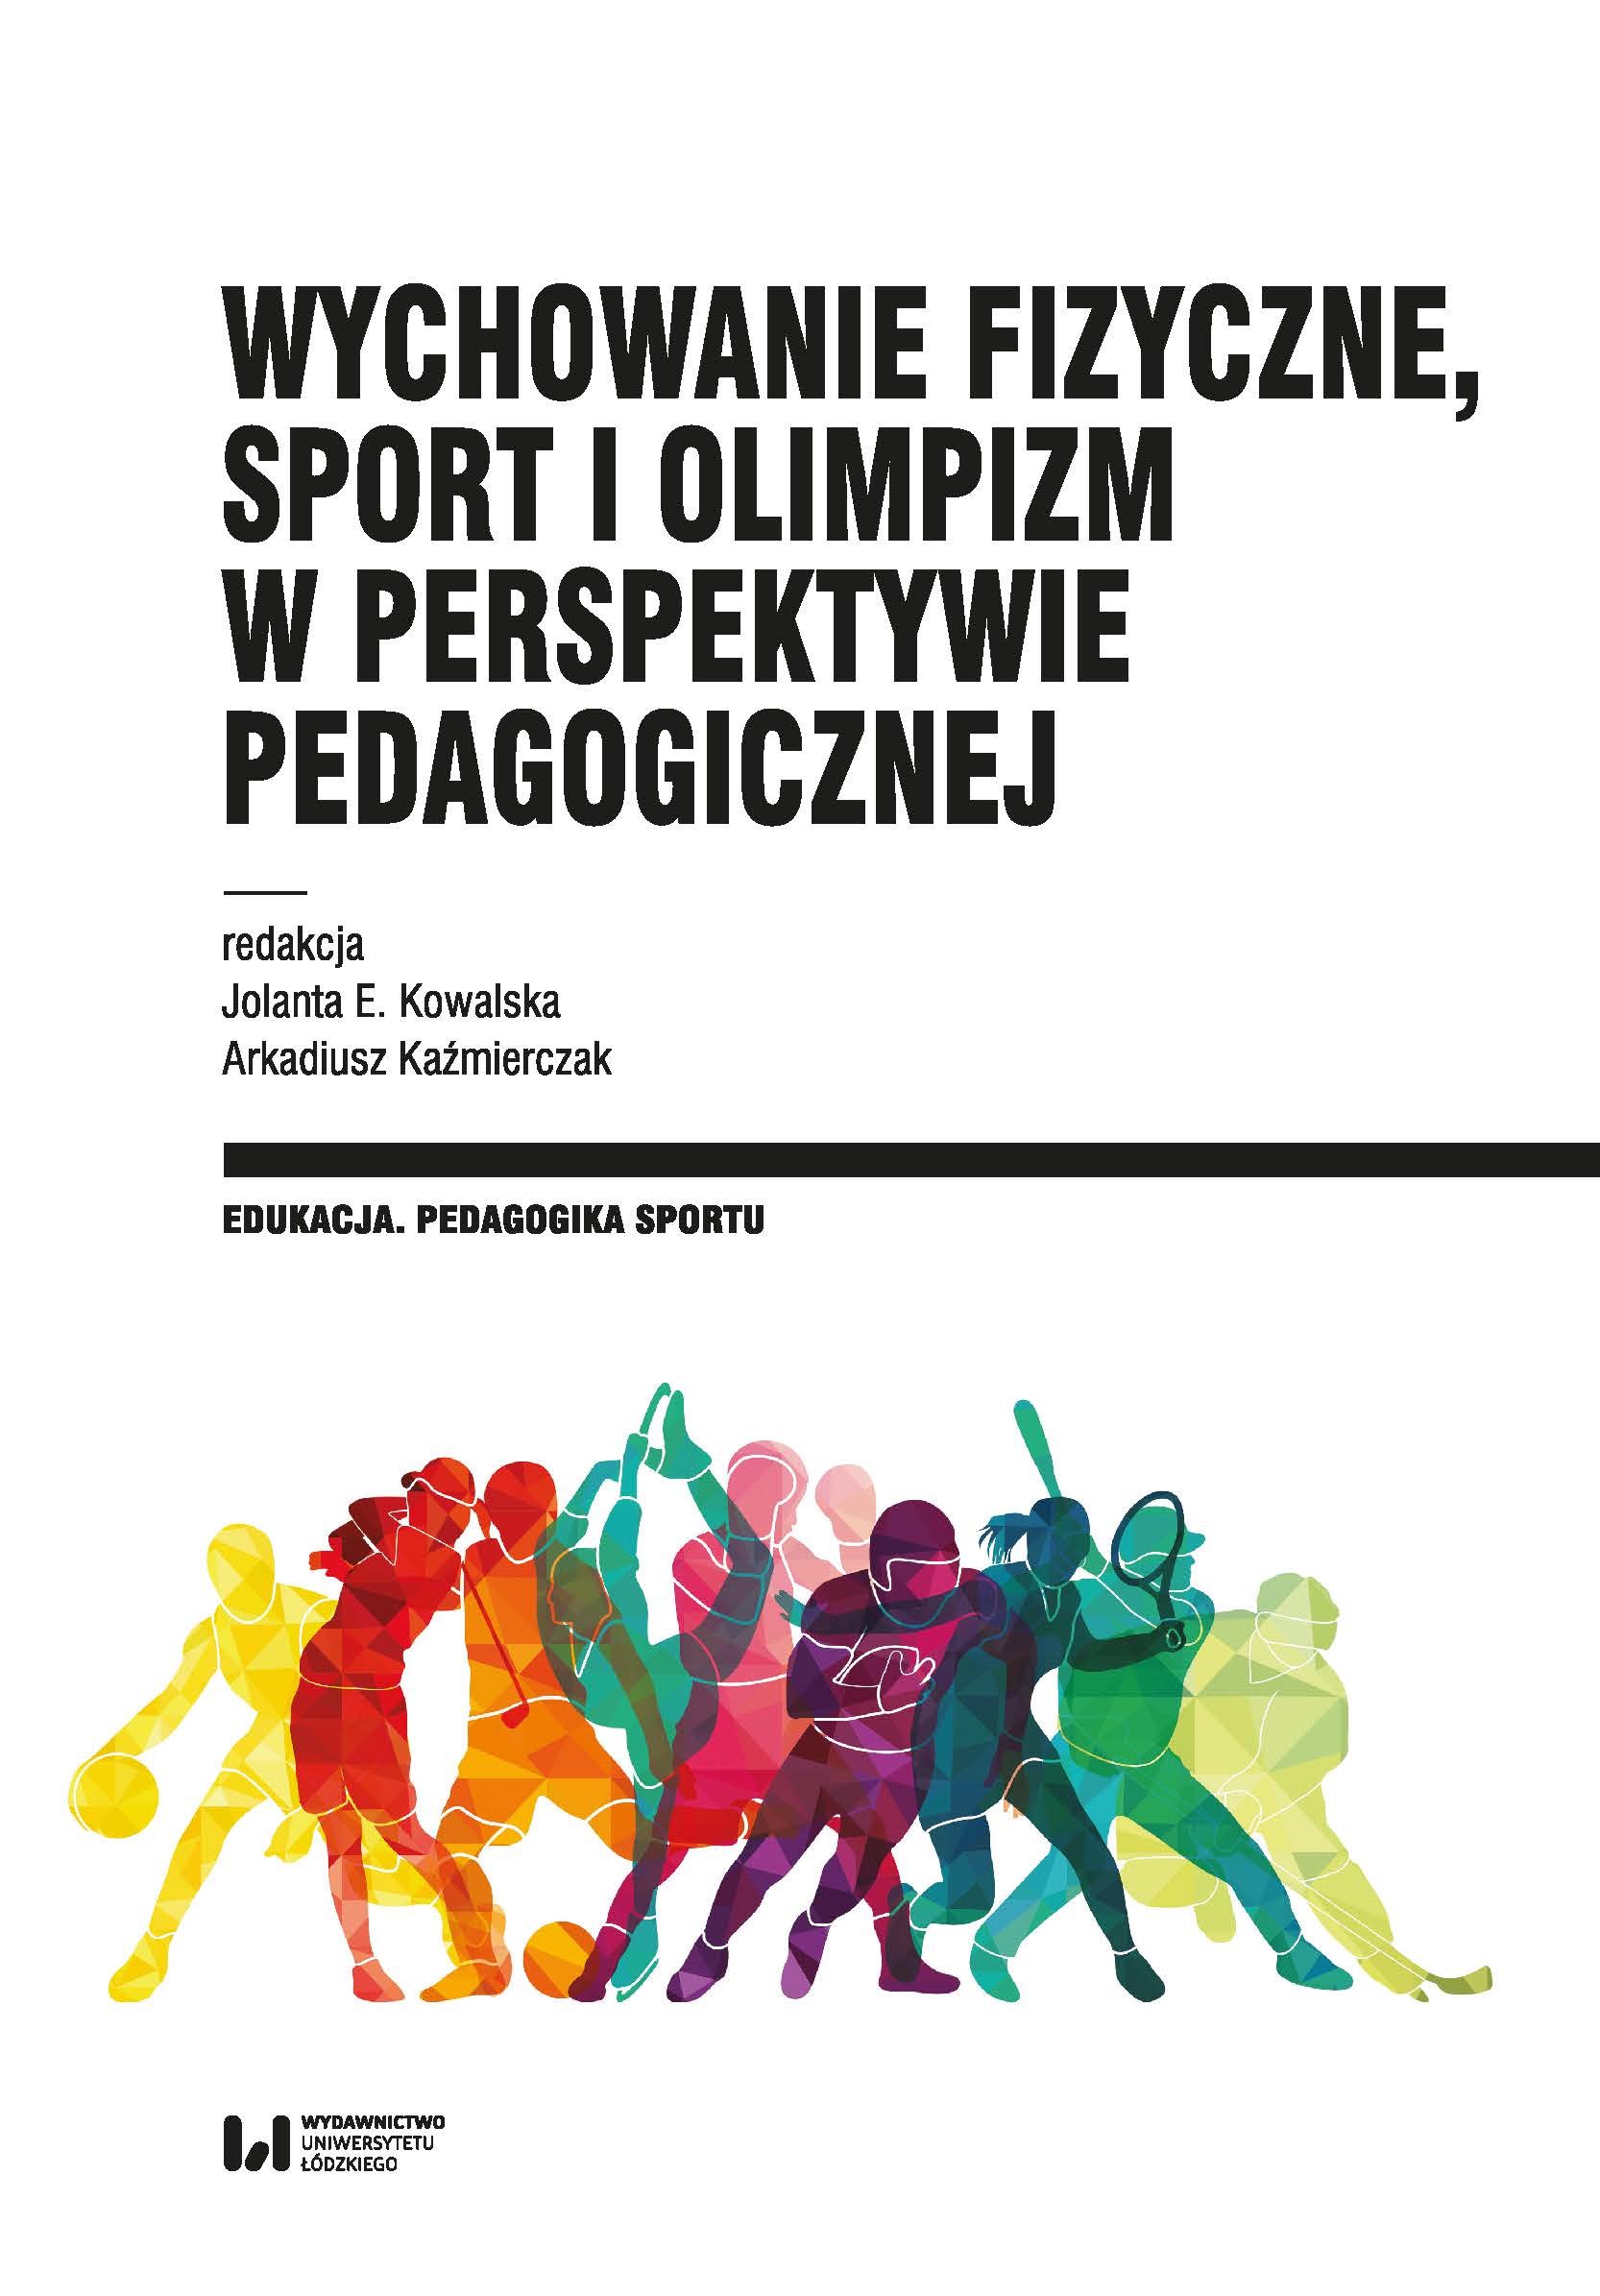 Physical education, sport and olympism from a pedagogical perspective Cover Image